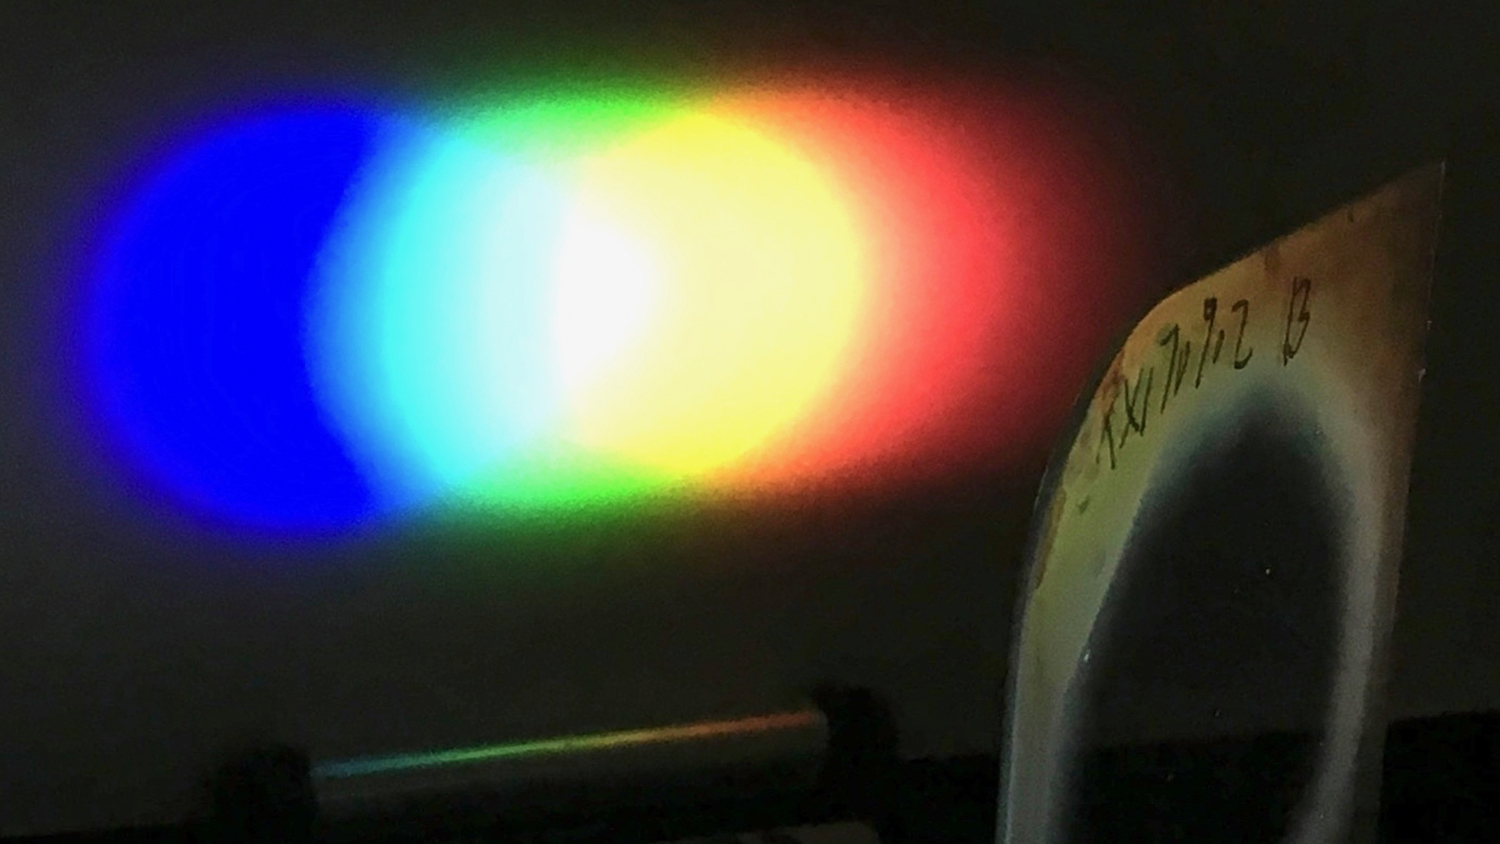 A one-inch diameter Bragg polarization grating diffracts white light from an LED flashlight onto a screen placed nearby.